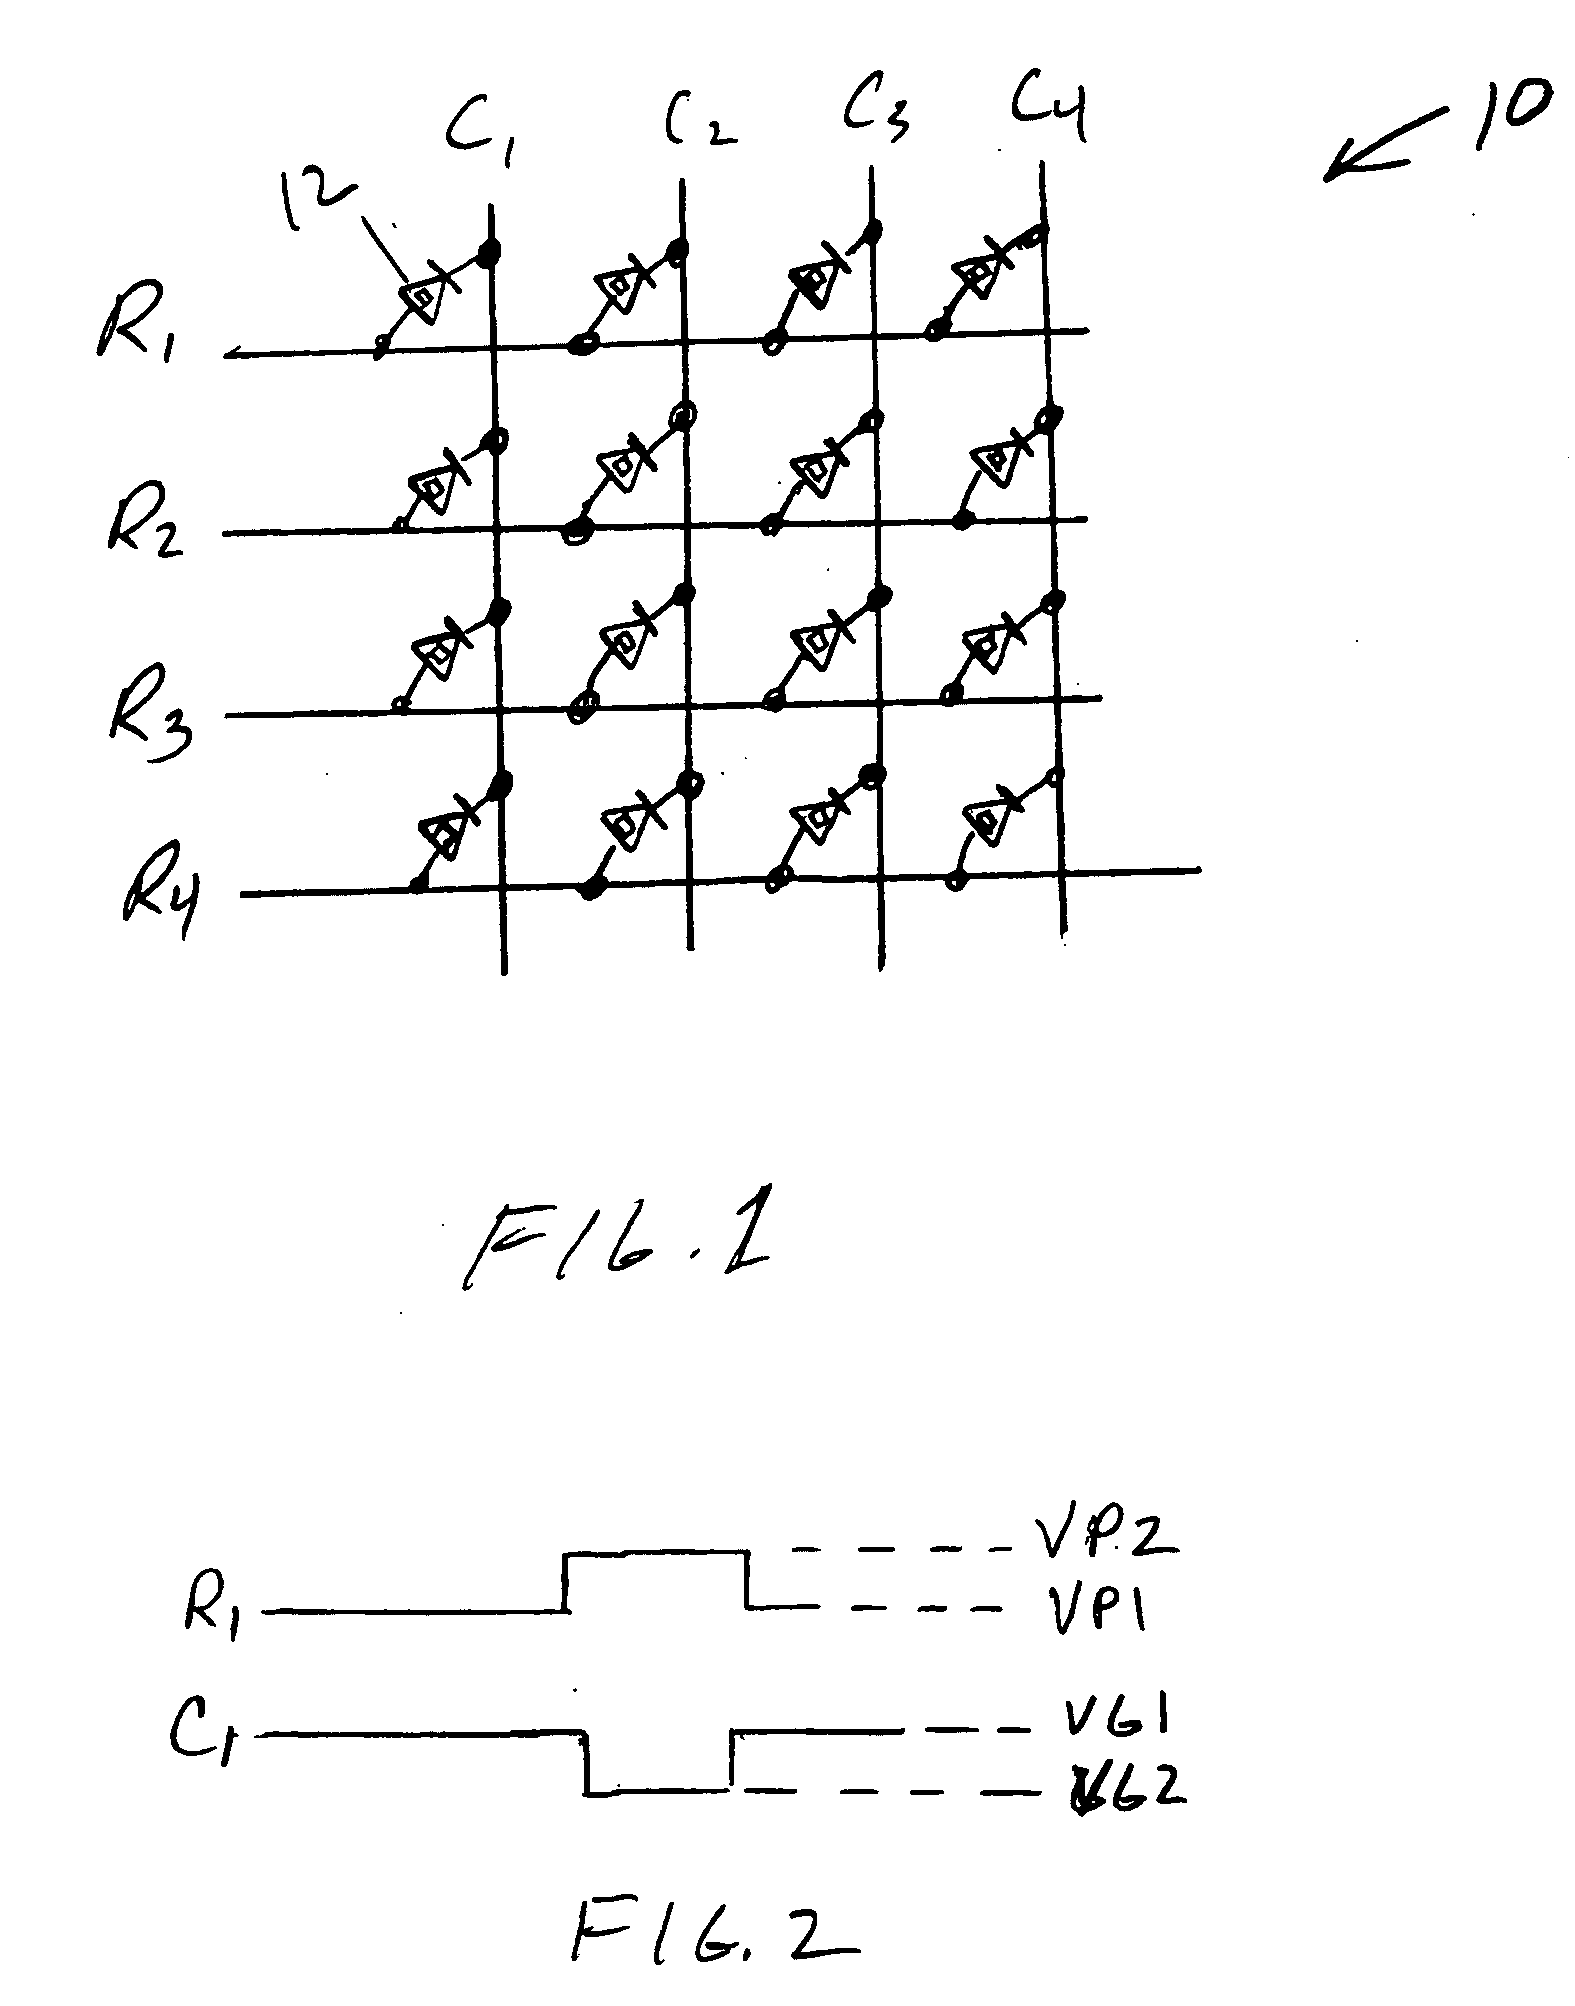 Display methods and systems